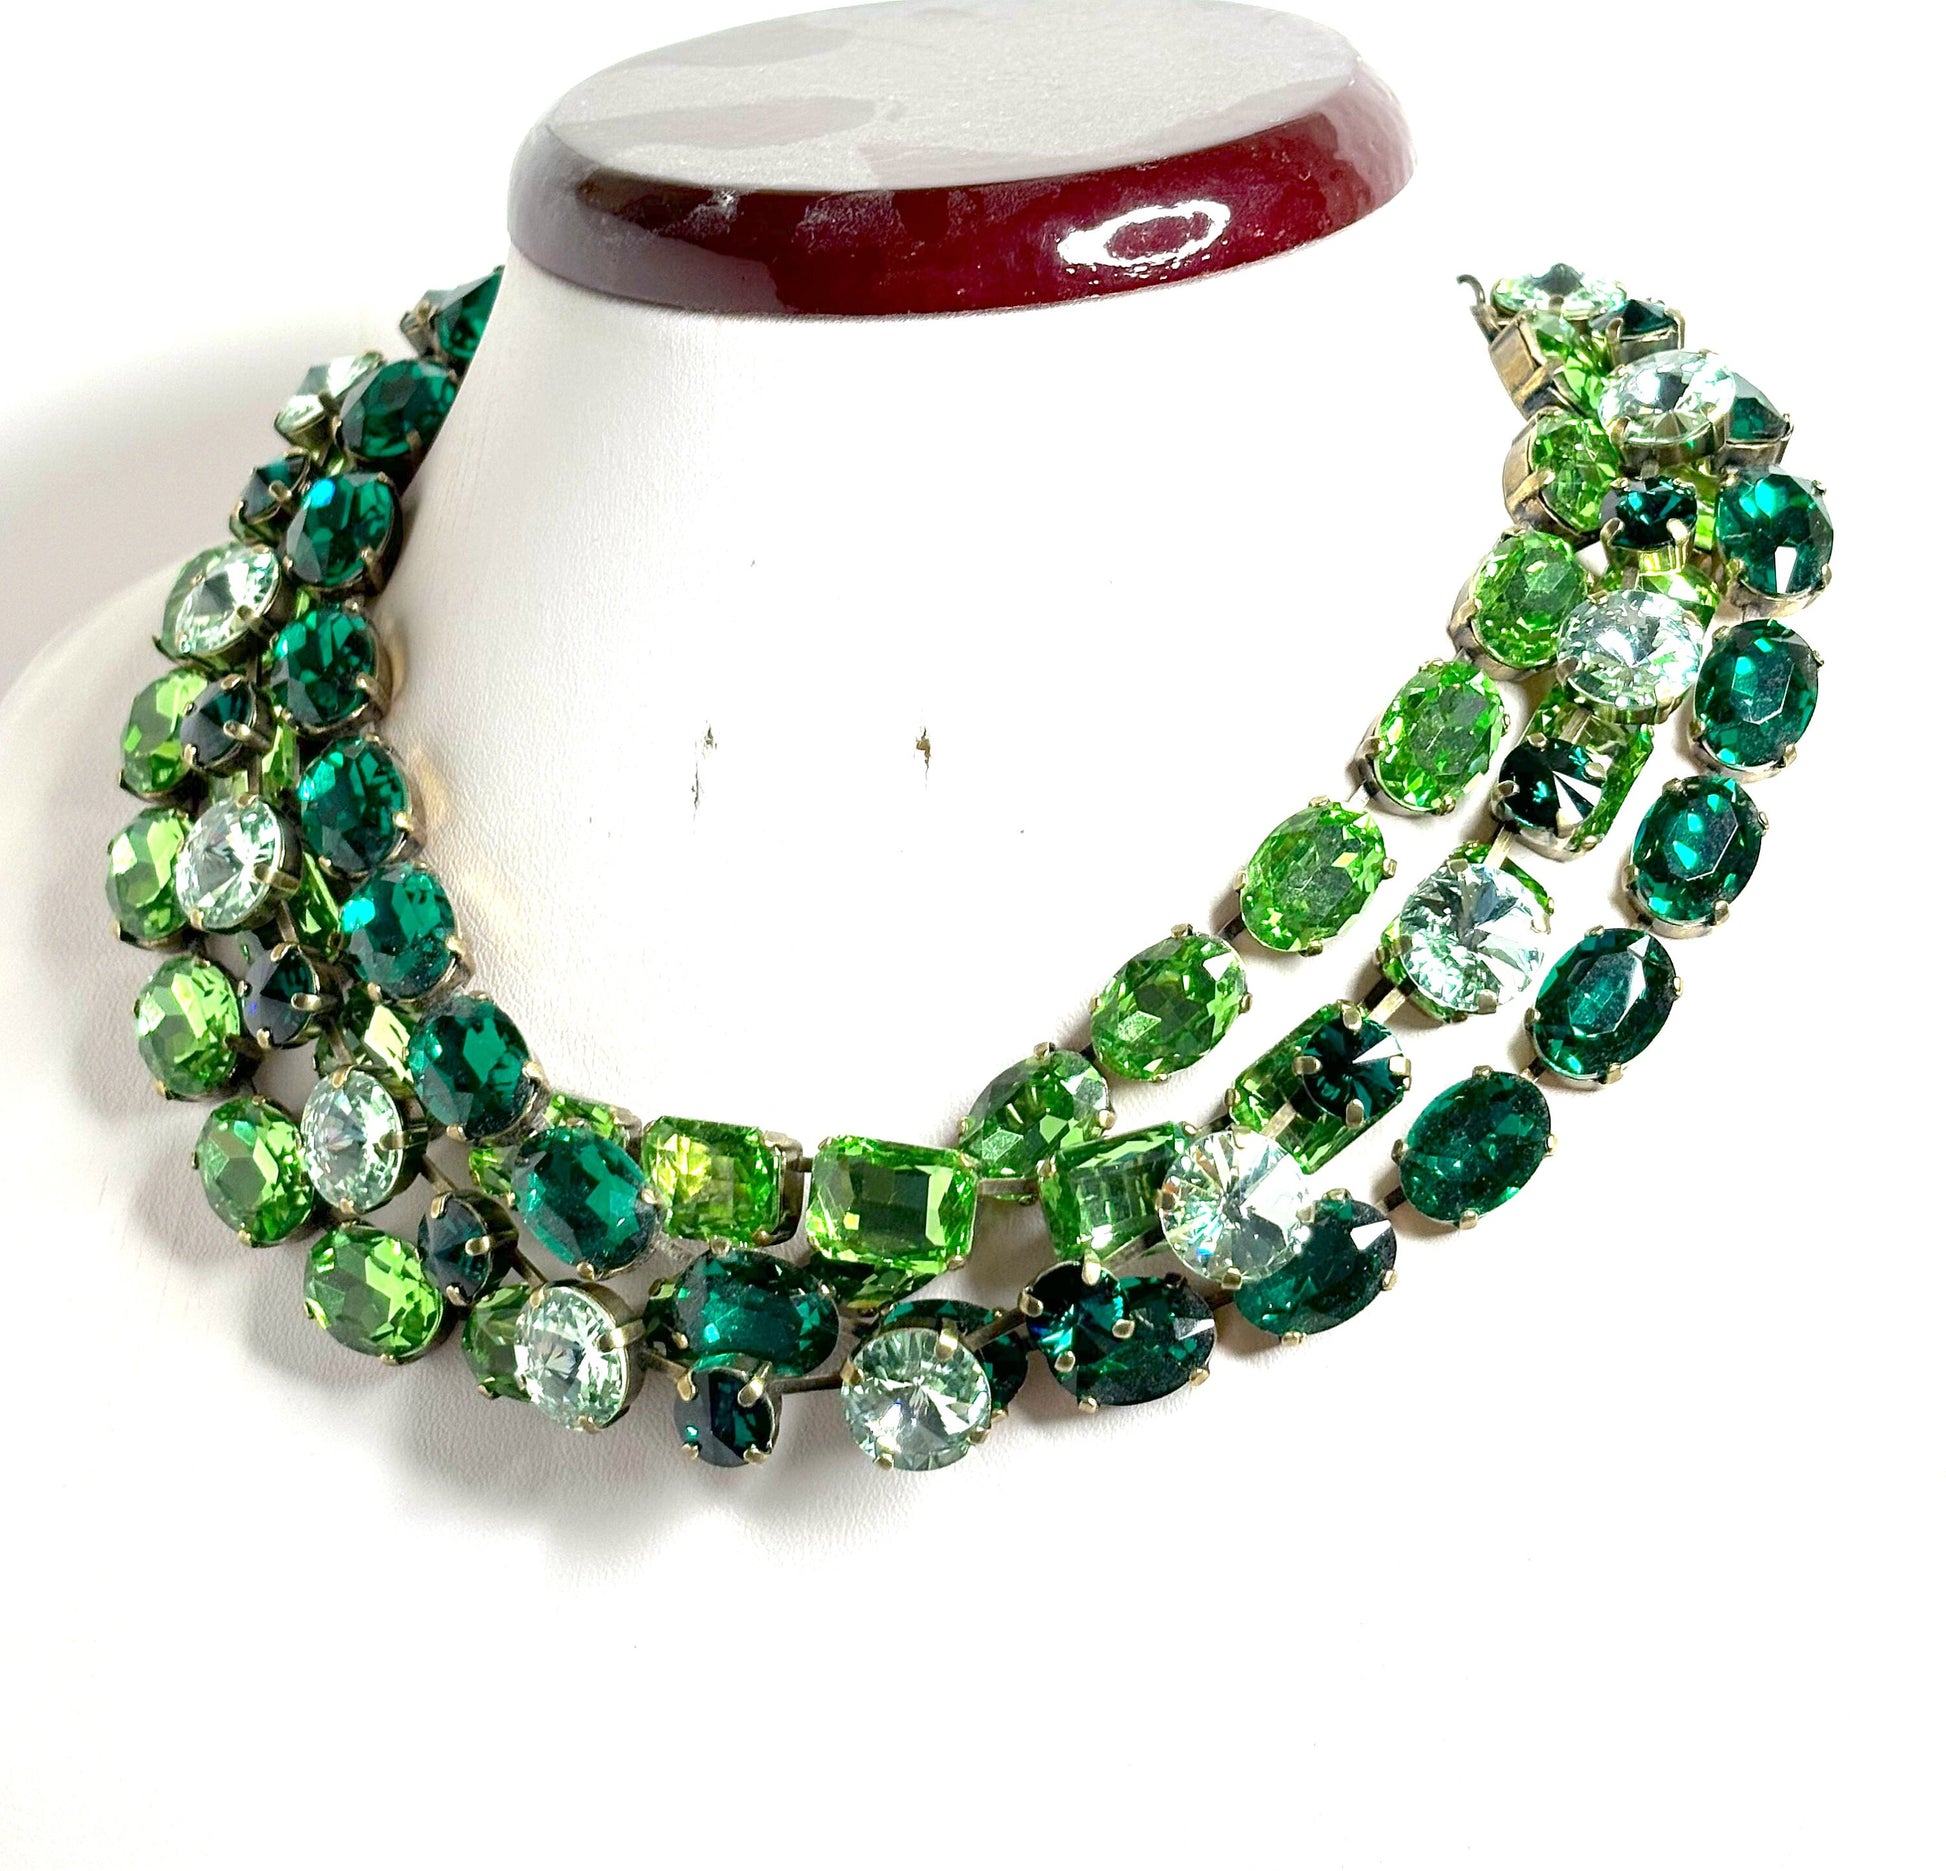 Emerald Peridot Crystal Georgian Collet Necklaces, Anna Wintour Style, Austrian Crystal, Riviere Necklace, Statement Necklaces for Women